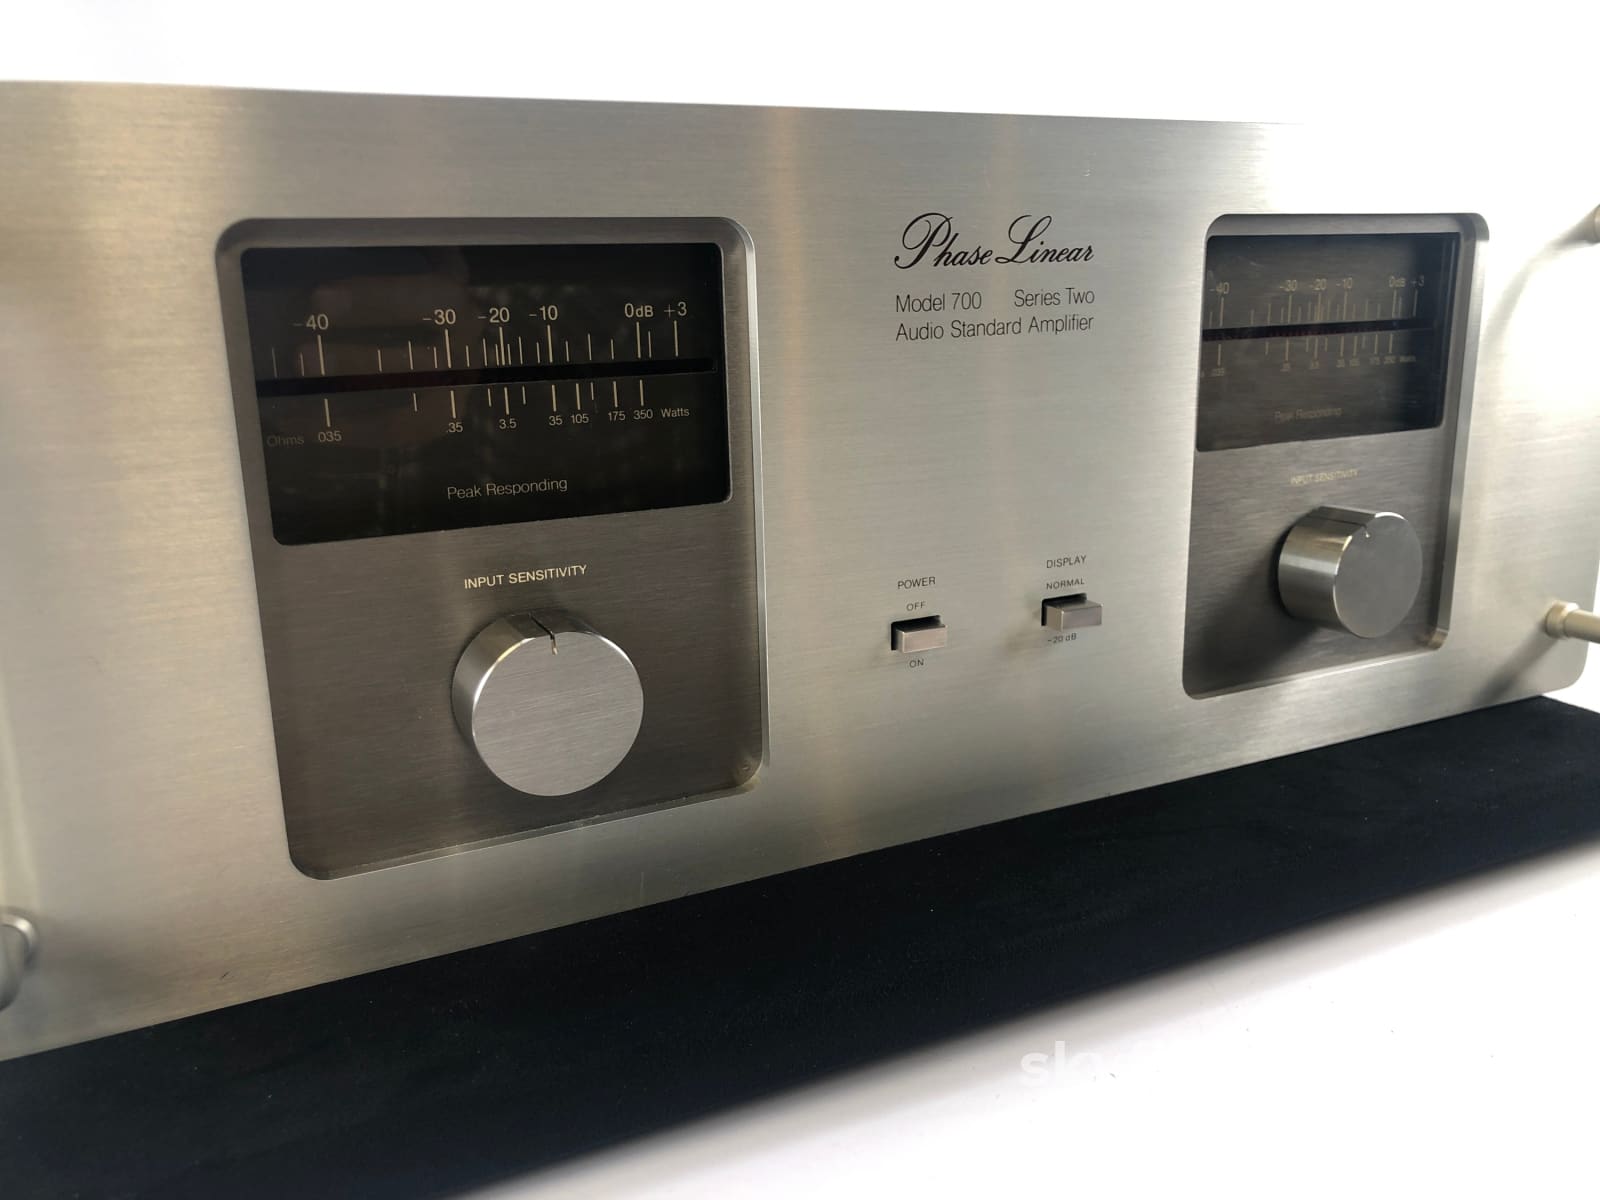 Phase Linear 700 Series Ii Amplifier - Incredibly Powerful